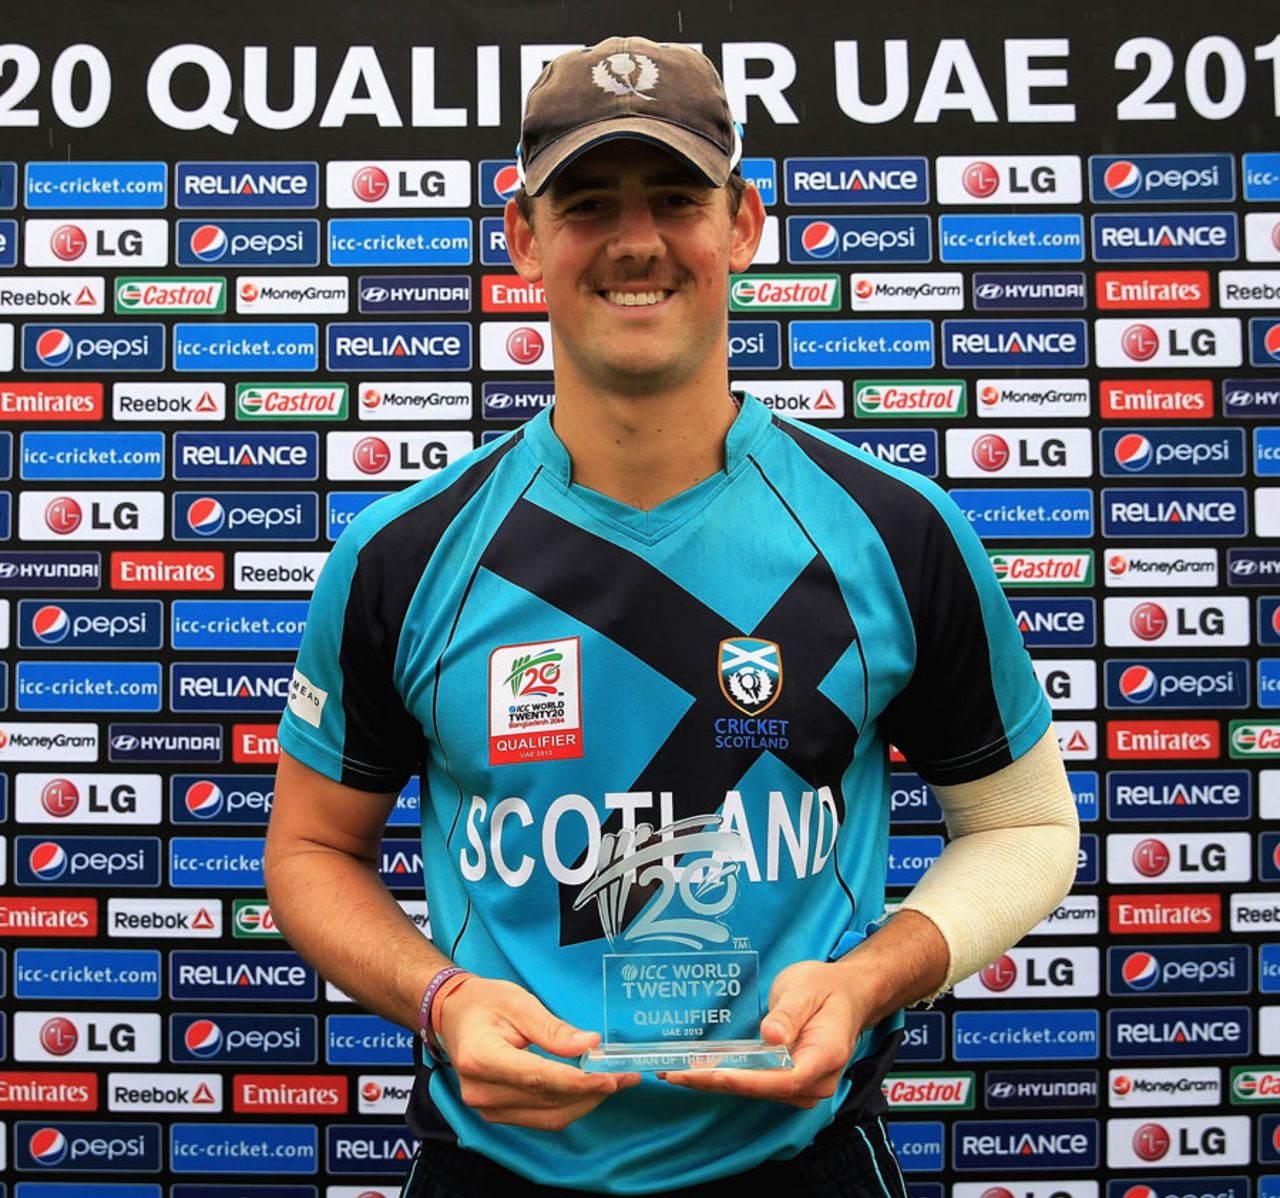 Rob Taylor was named Man of the Match for bowling figures of 3 for 16, Scotland v Papua New Guinea, ICC World Twenty20 Qualifier, Group B, Dubai, November 21, 2013